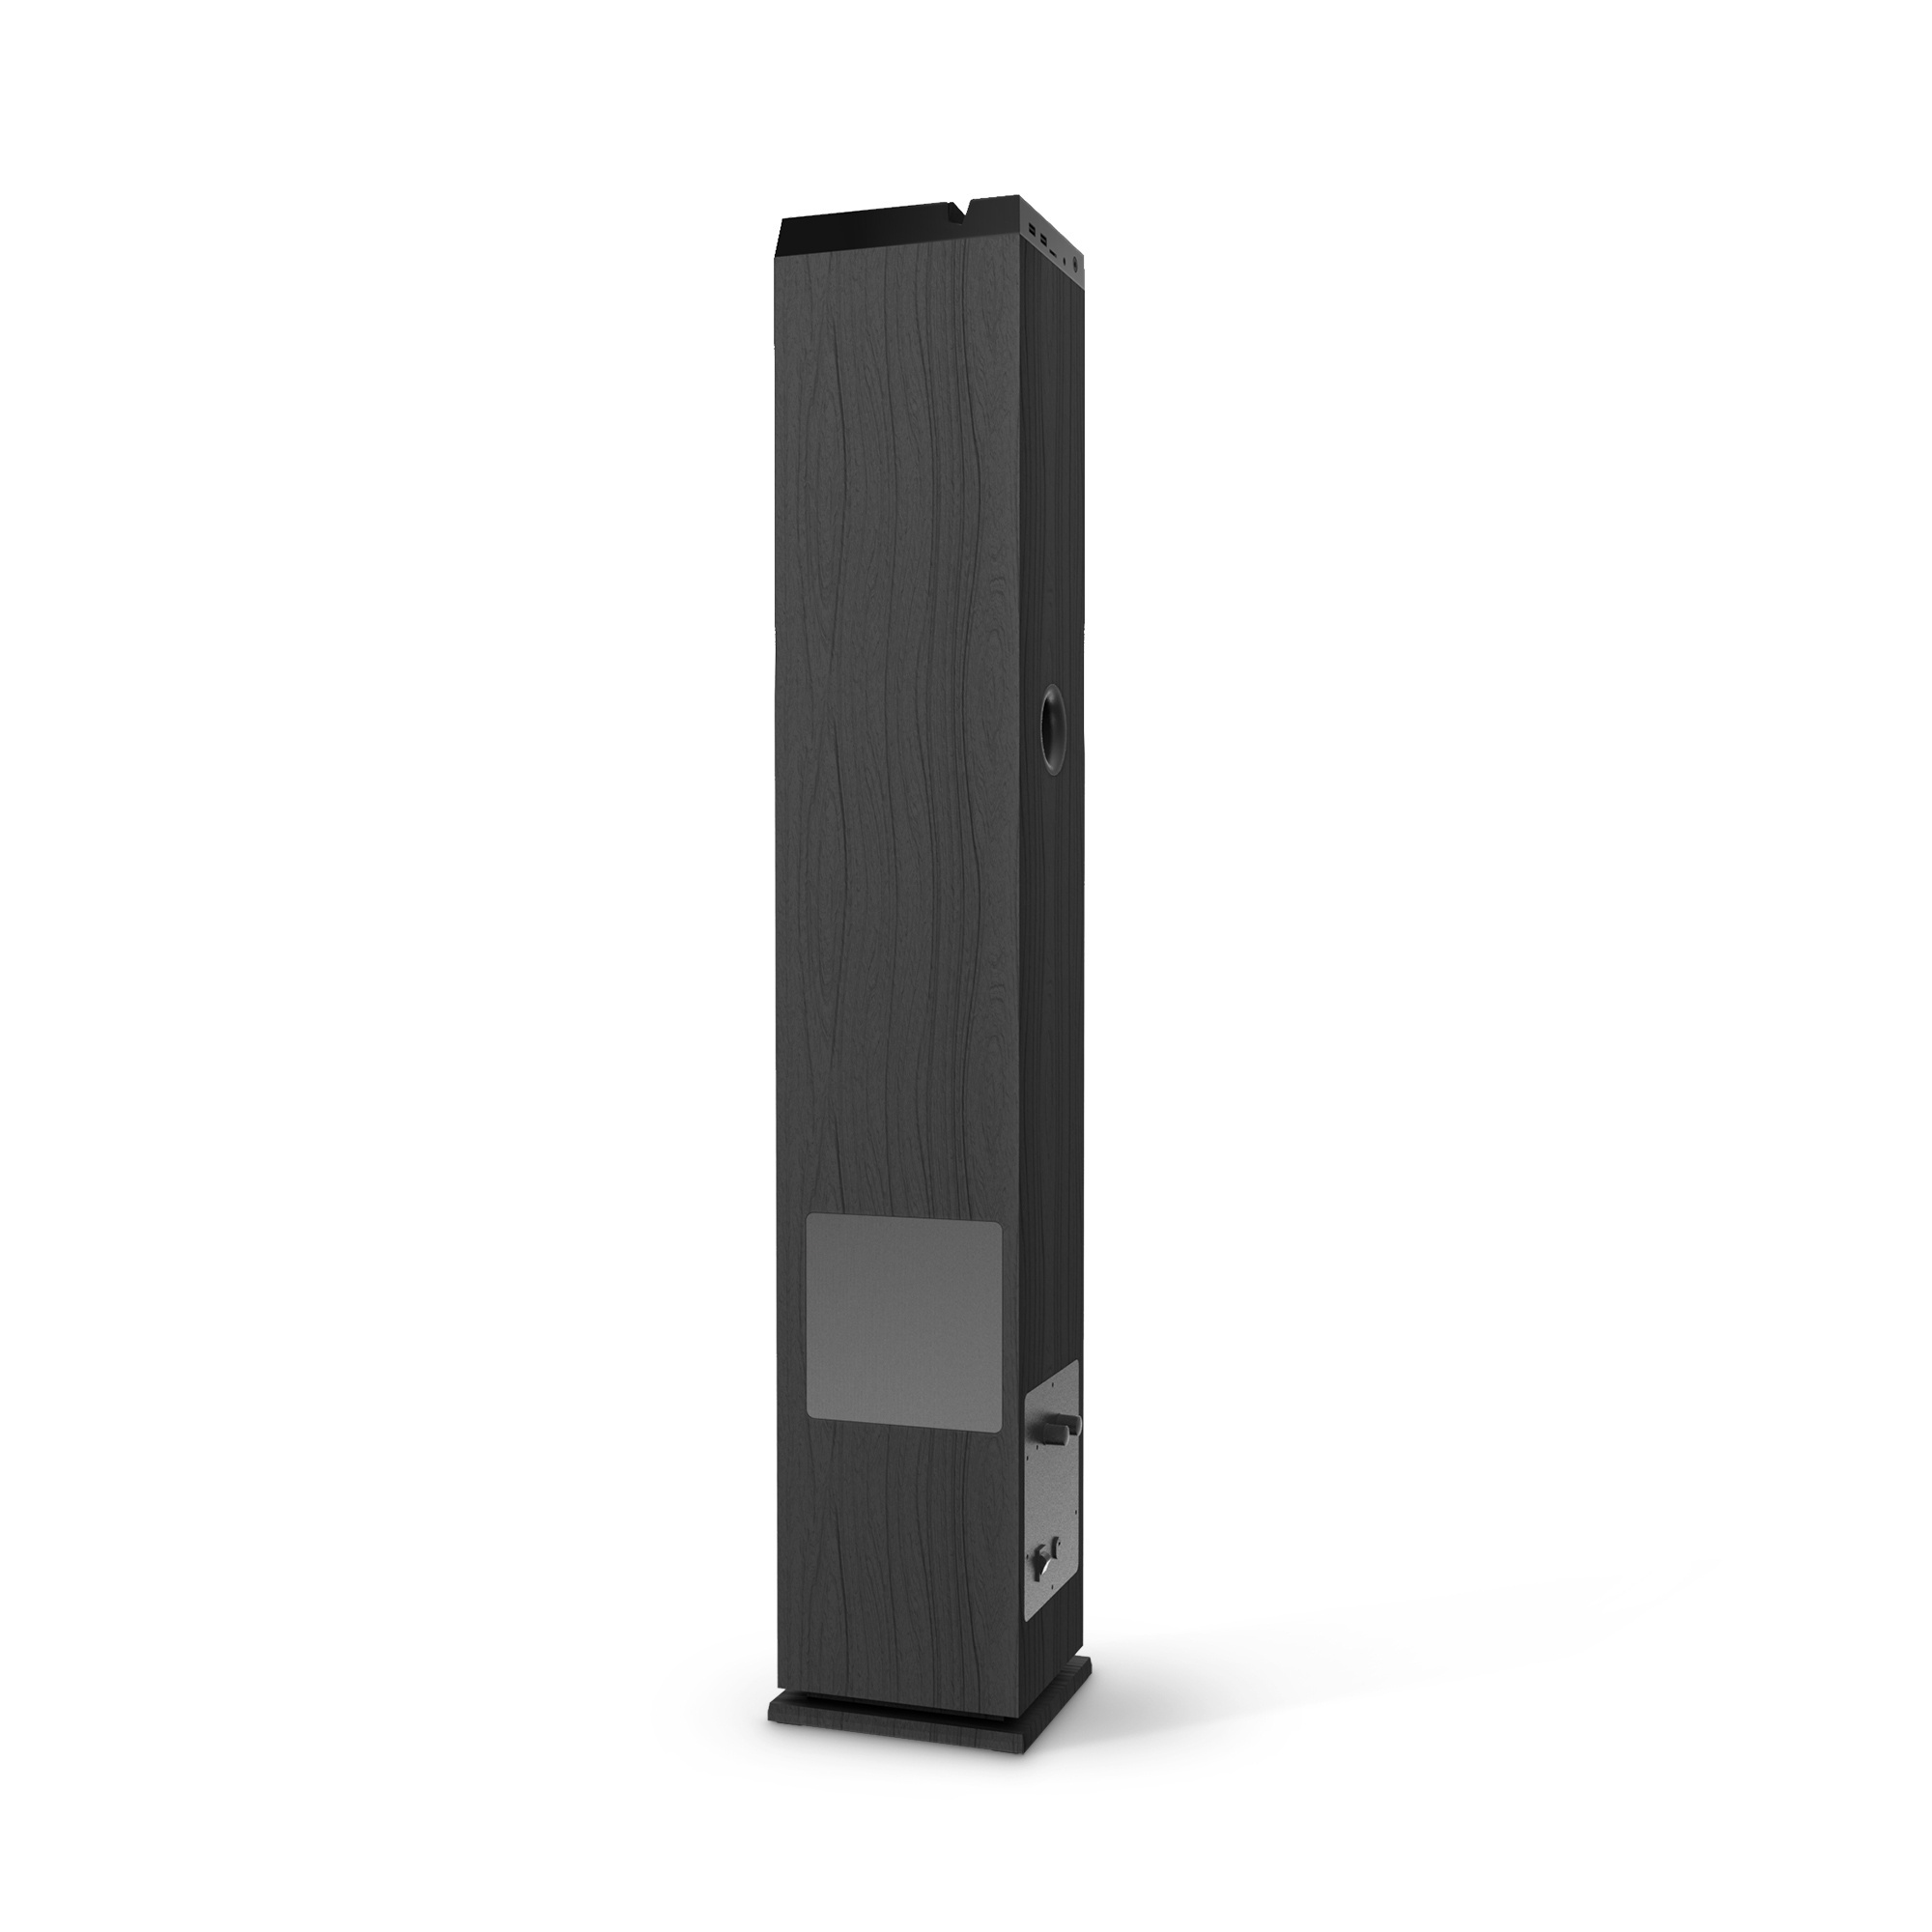 Stereo tower speaker with built-in subwoofer and 65 W power